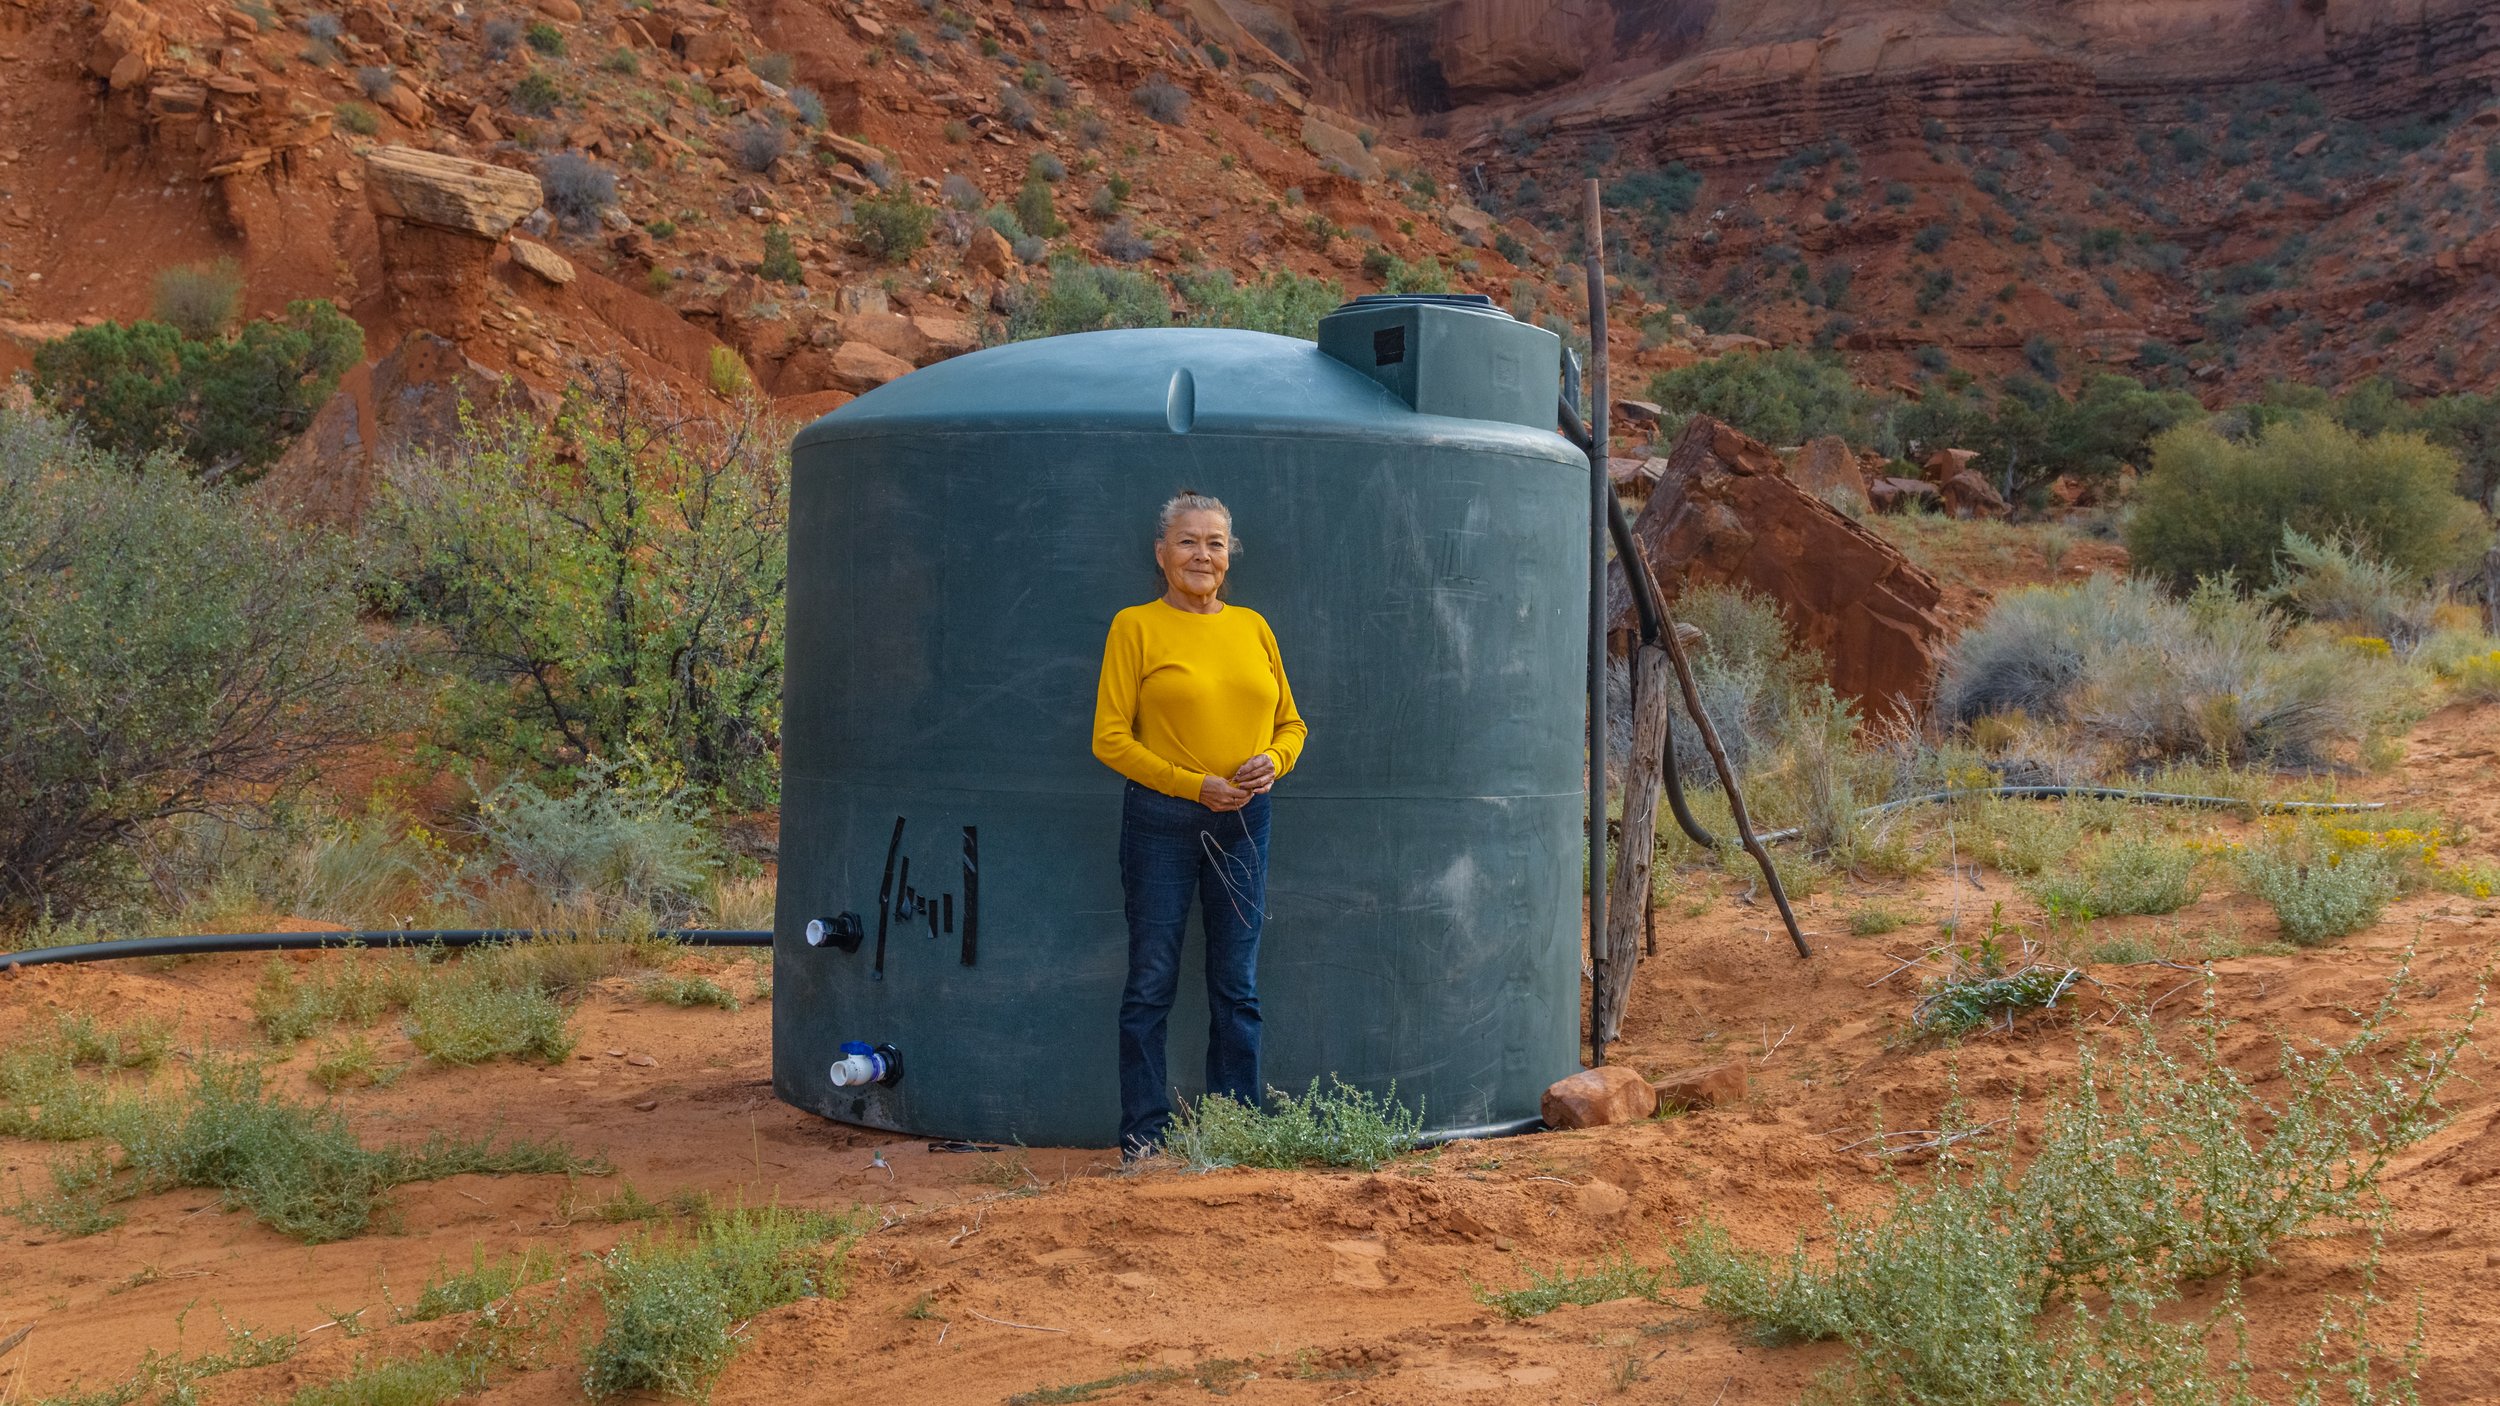  Effie Yazzie stands in front of one of the recently installed water collection tanks in Monument Valley called Piney Springs. Her grandfather used to collect water from the head of the spring when she was a little girl. This water collection tank is